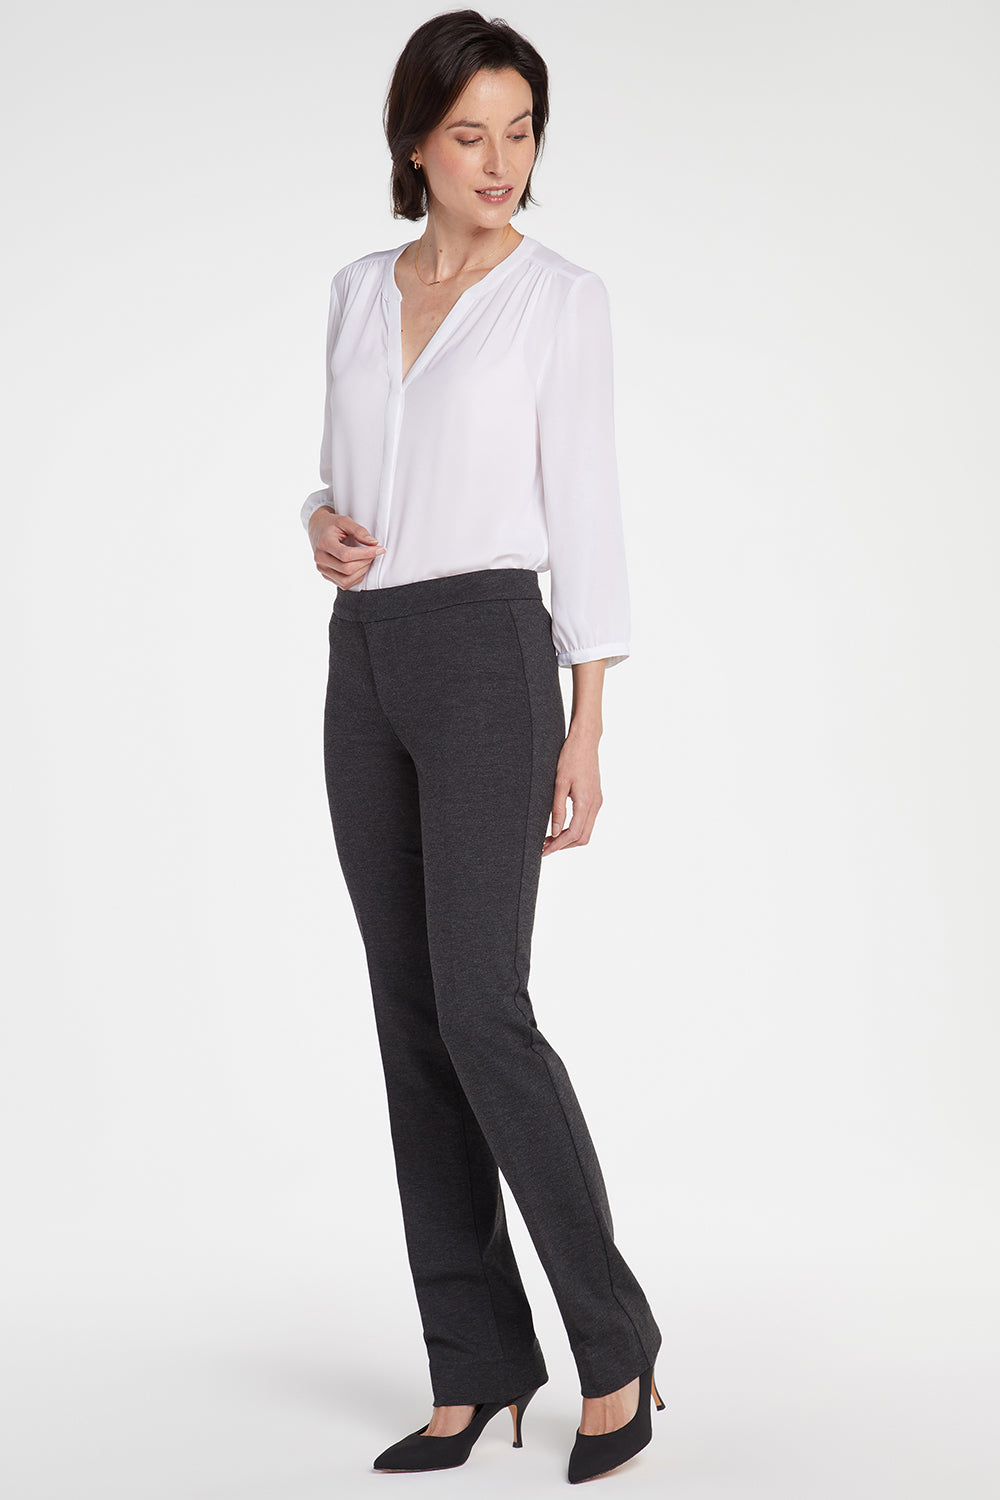 Women's High Waisted Suit Pants Tie Waisted Business Casual Wide Straight  Leg Pants Trousers Office Ladies Pants - Walmart.com